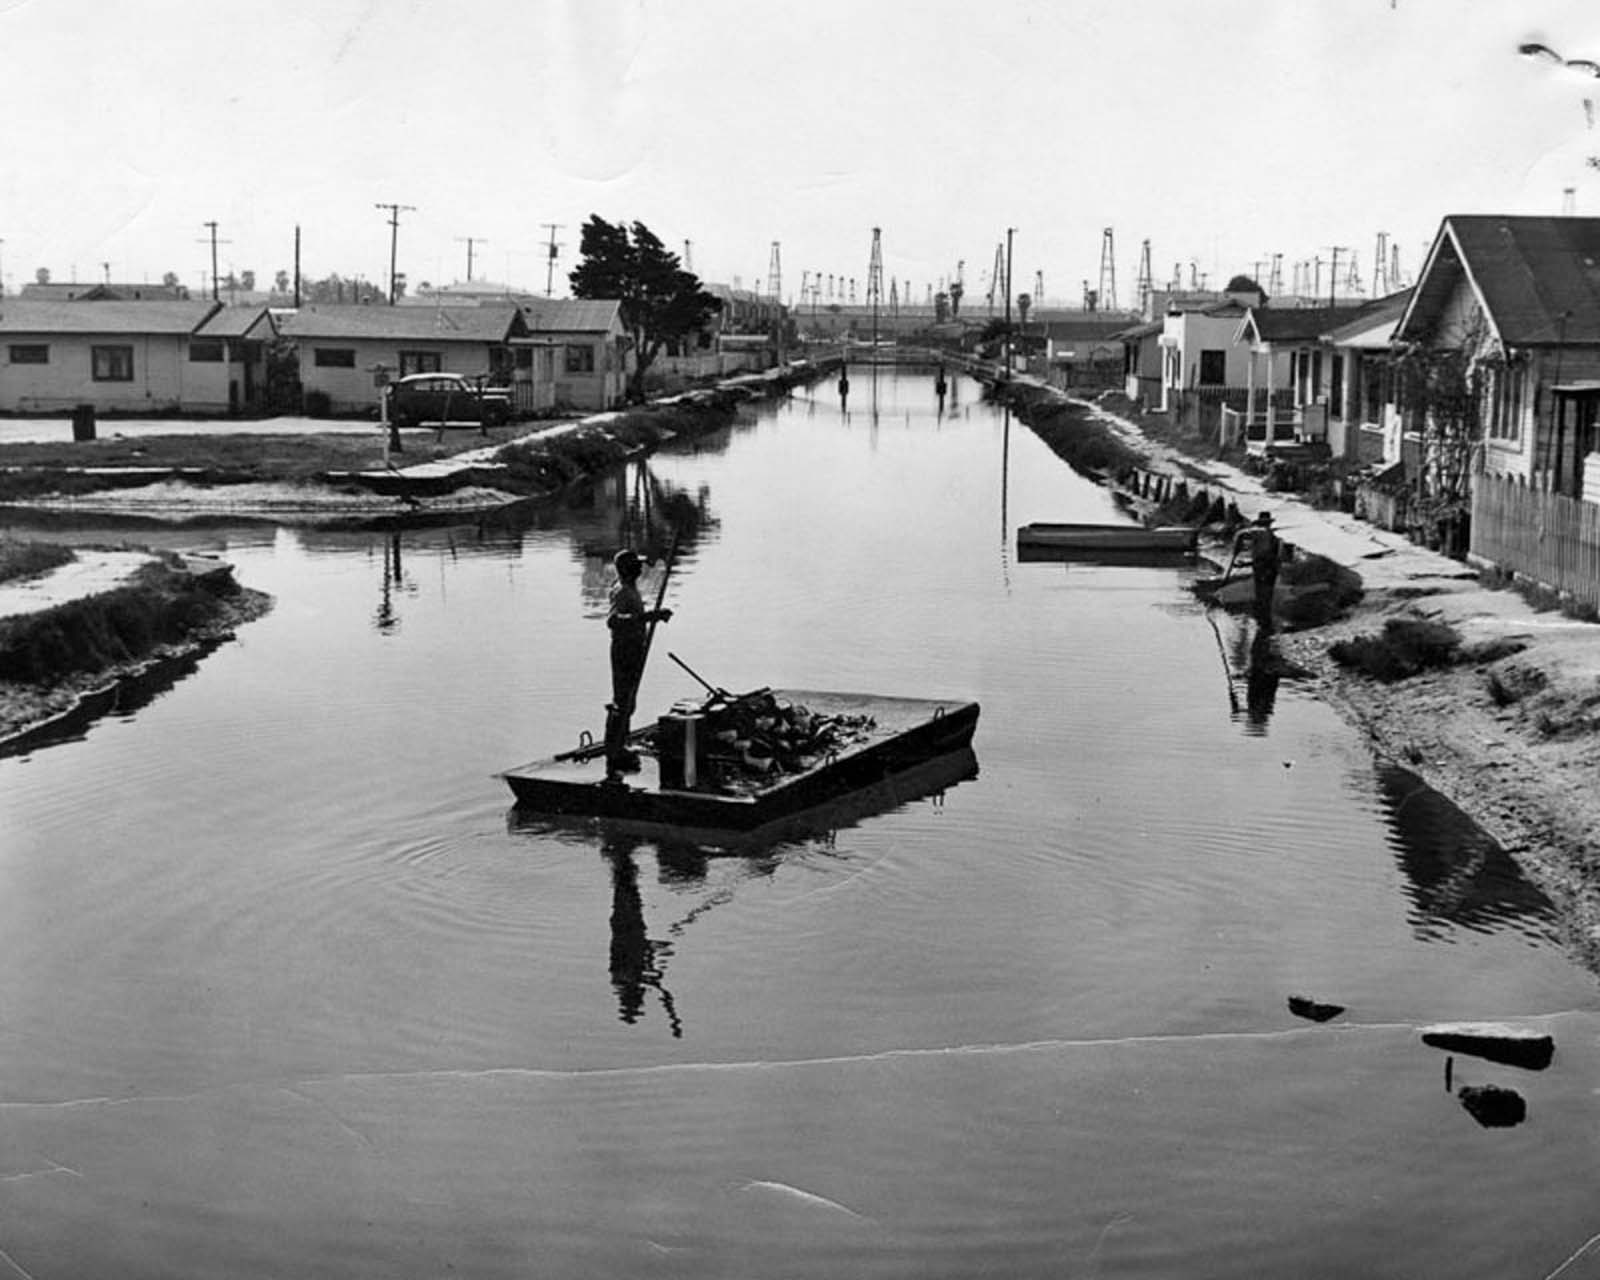 A man poles a garbage scow down the Grand Canal in Venice, California, with oil derricks on the horizon, 1953.